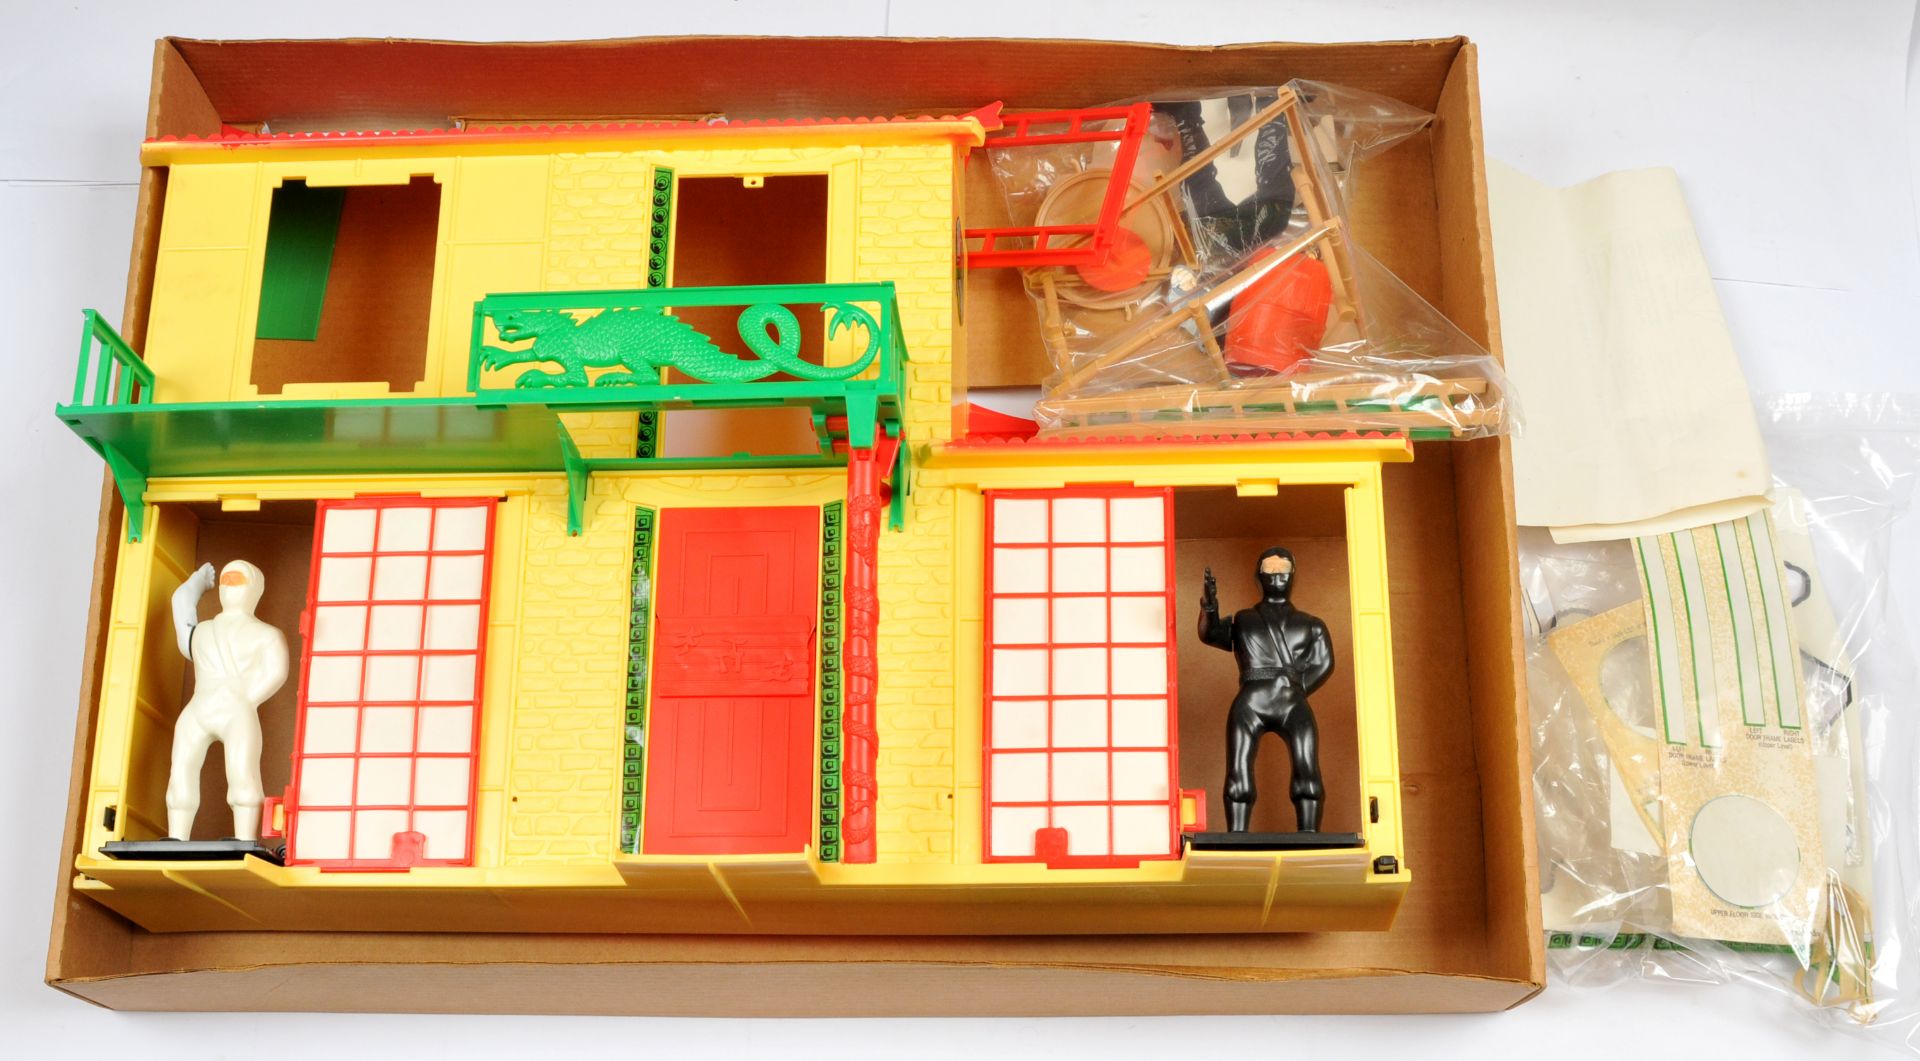 Remco The Karate Kid Attack Alley & Training Centre Play-set - Image 2 of 2